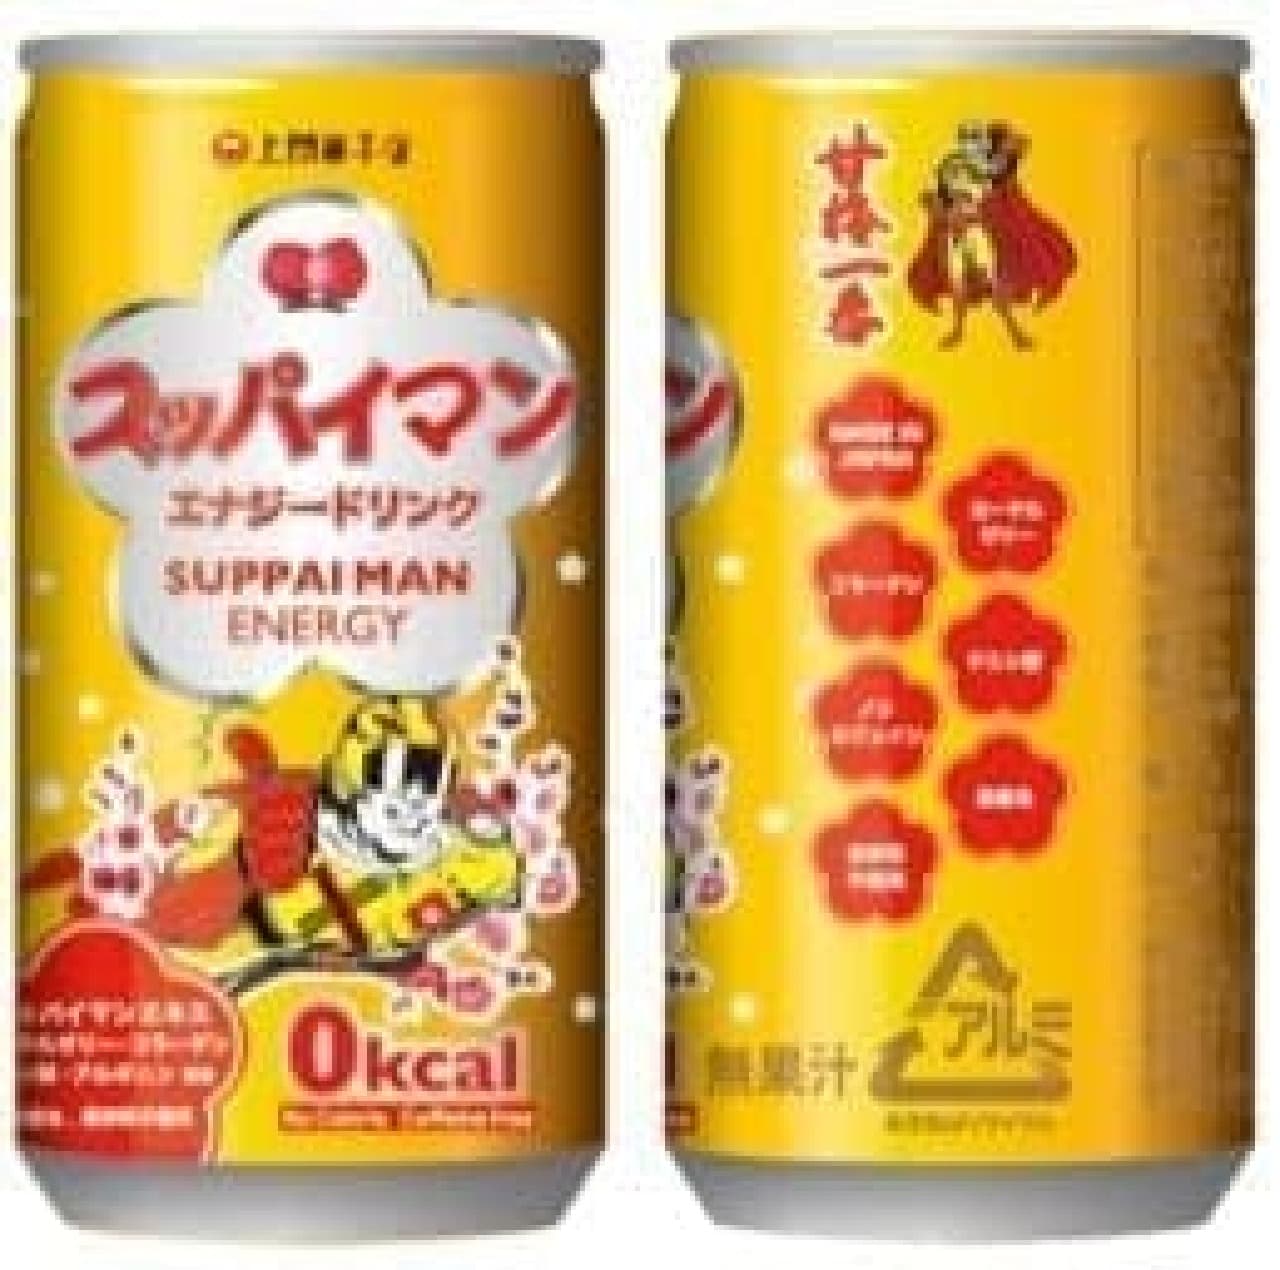 How about a "drinking" Suppaiman?